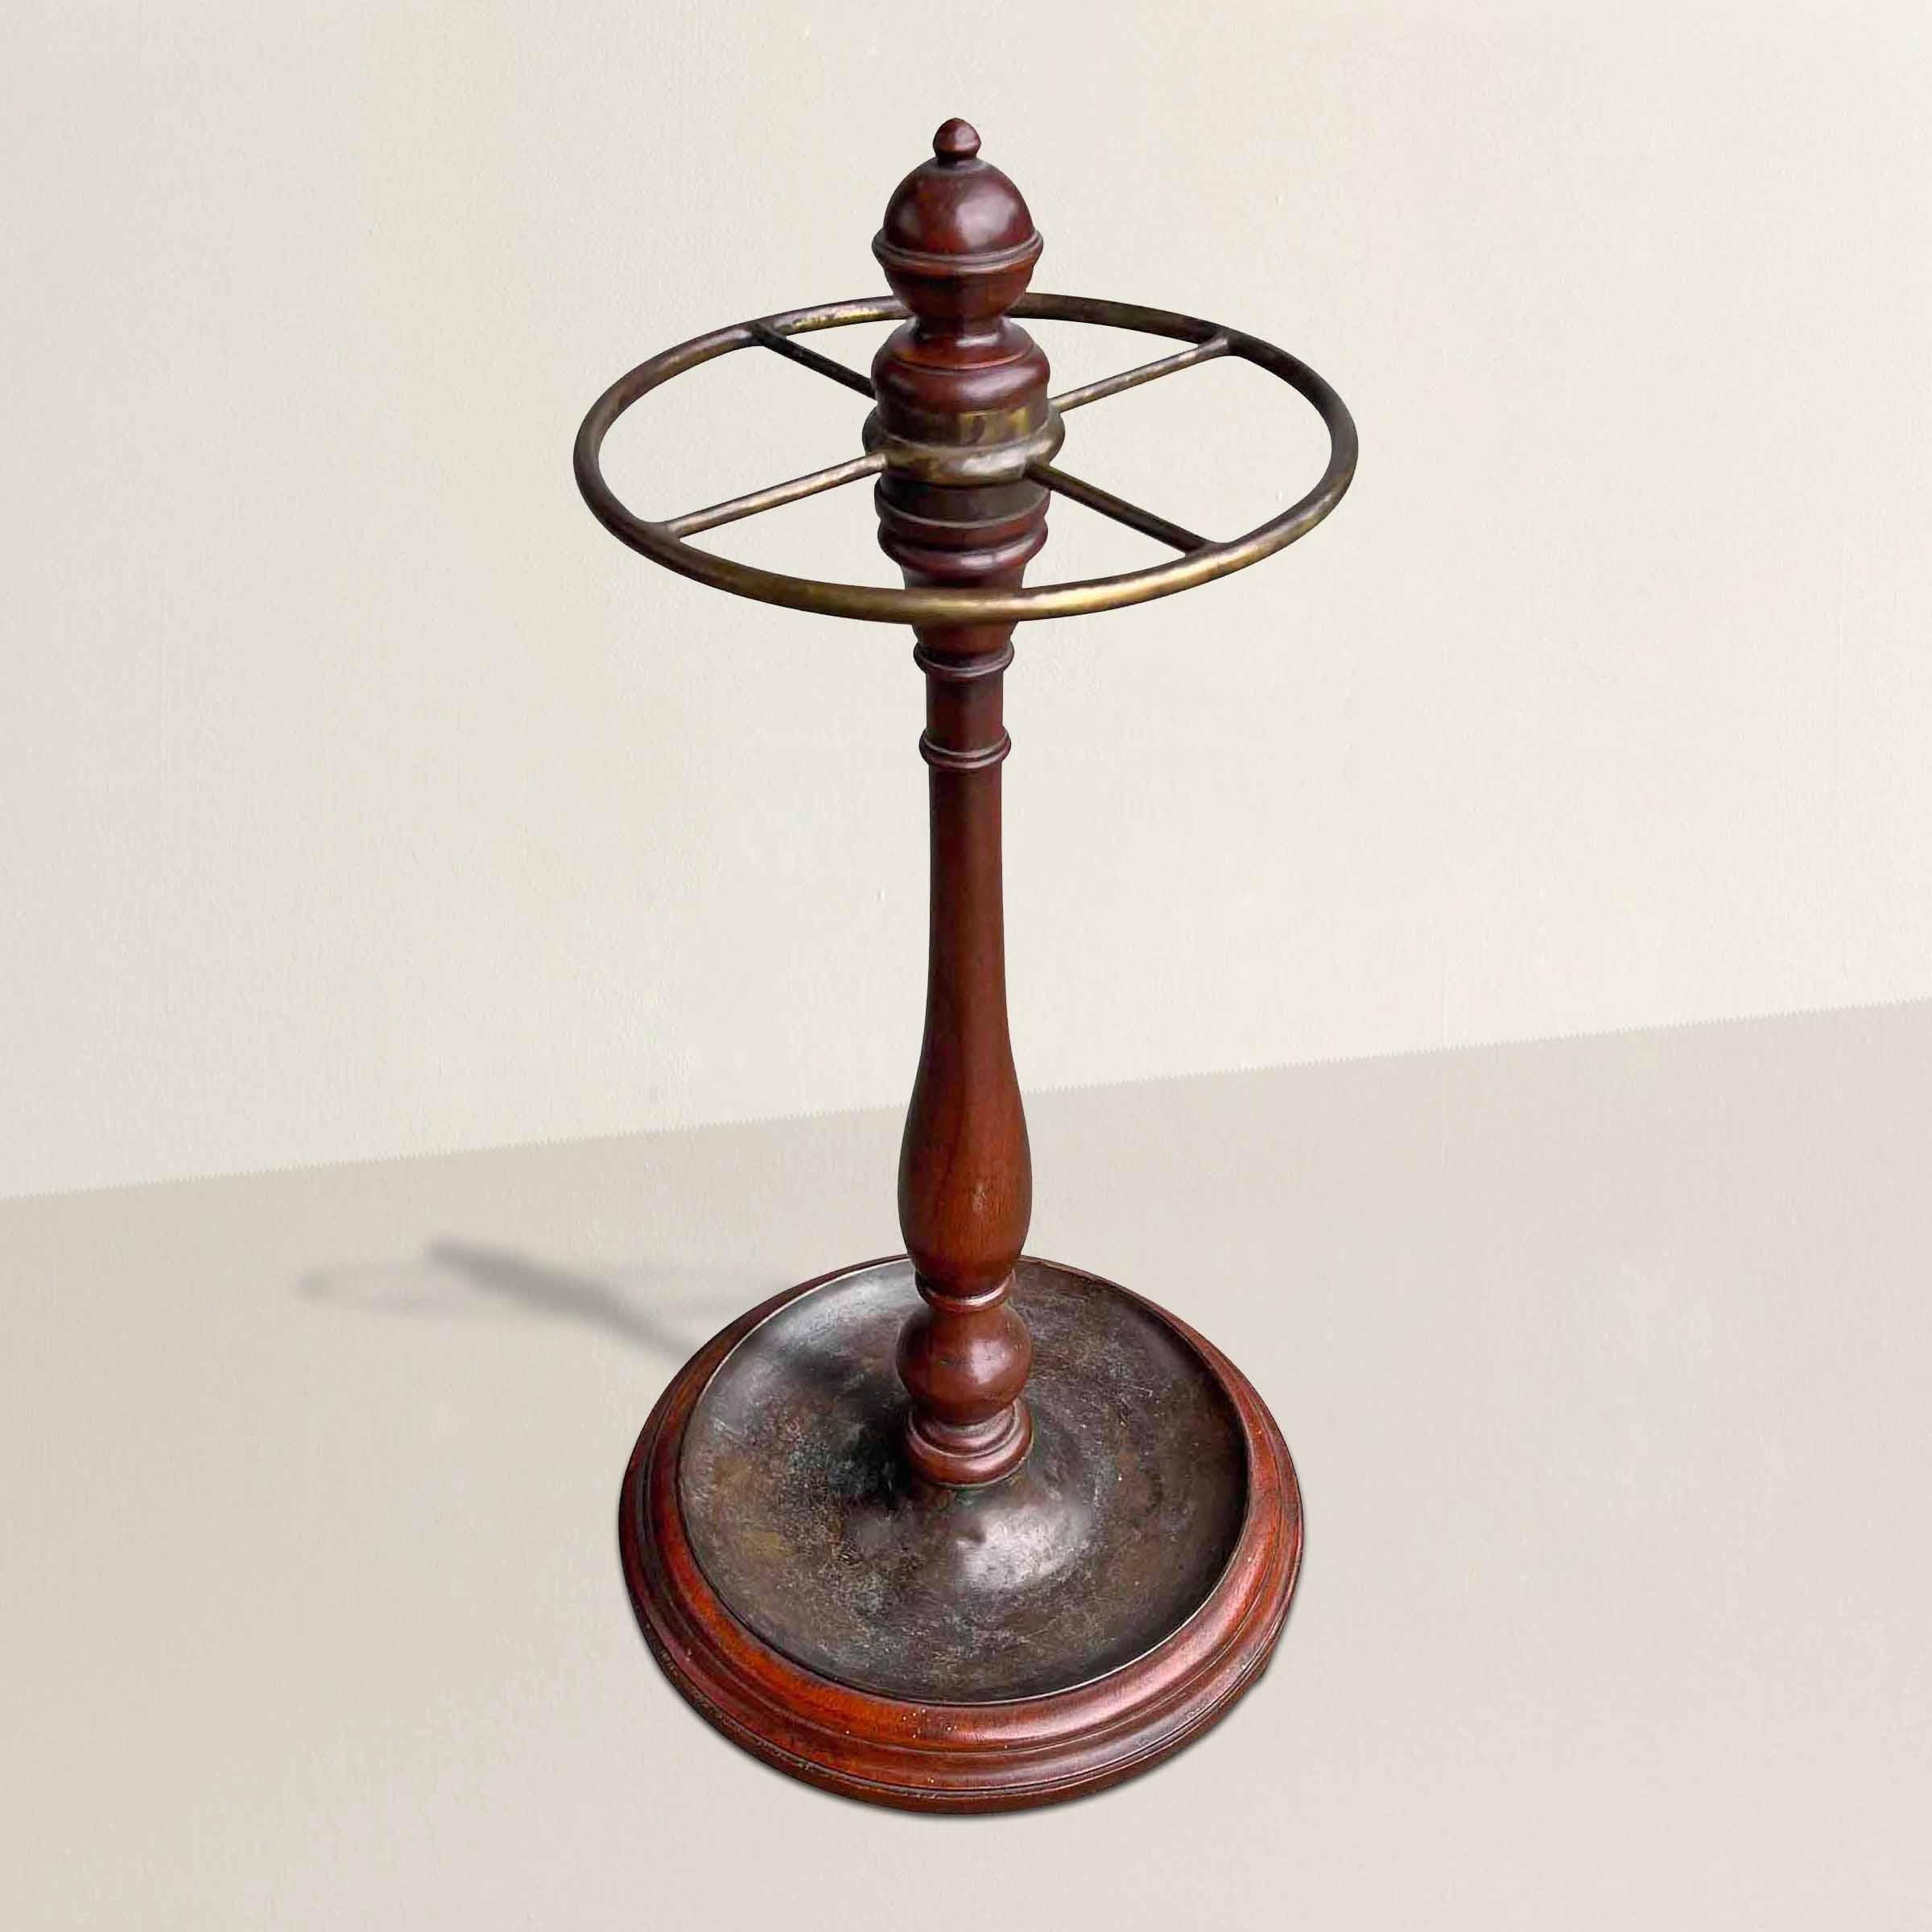 Transport yourself to the elegant world of early 20th-century England with this Edwardian period turned wood and brass umbrella stand. Reflecting the stylistic characteristics of the Edwardian era (1901-1910), this piece marries exquisite